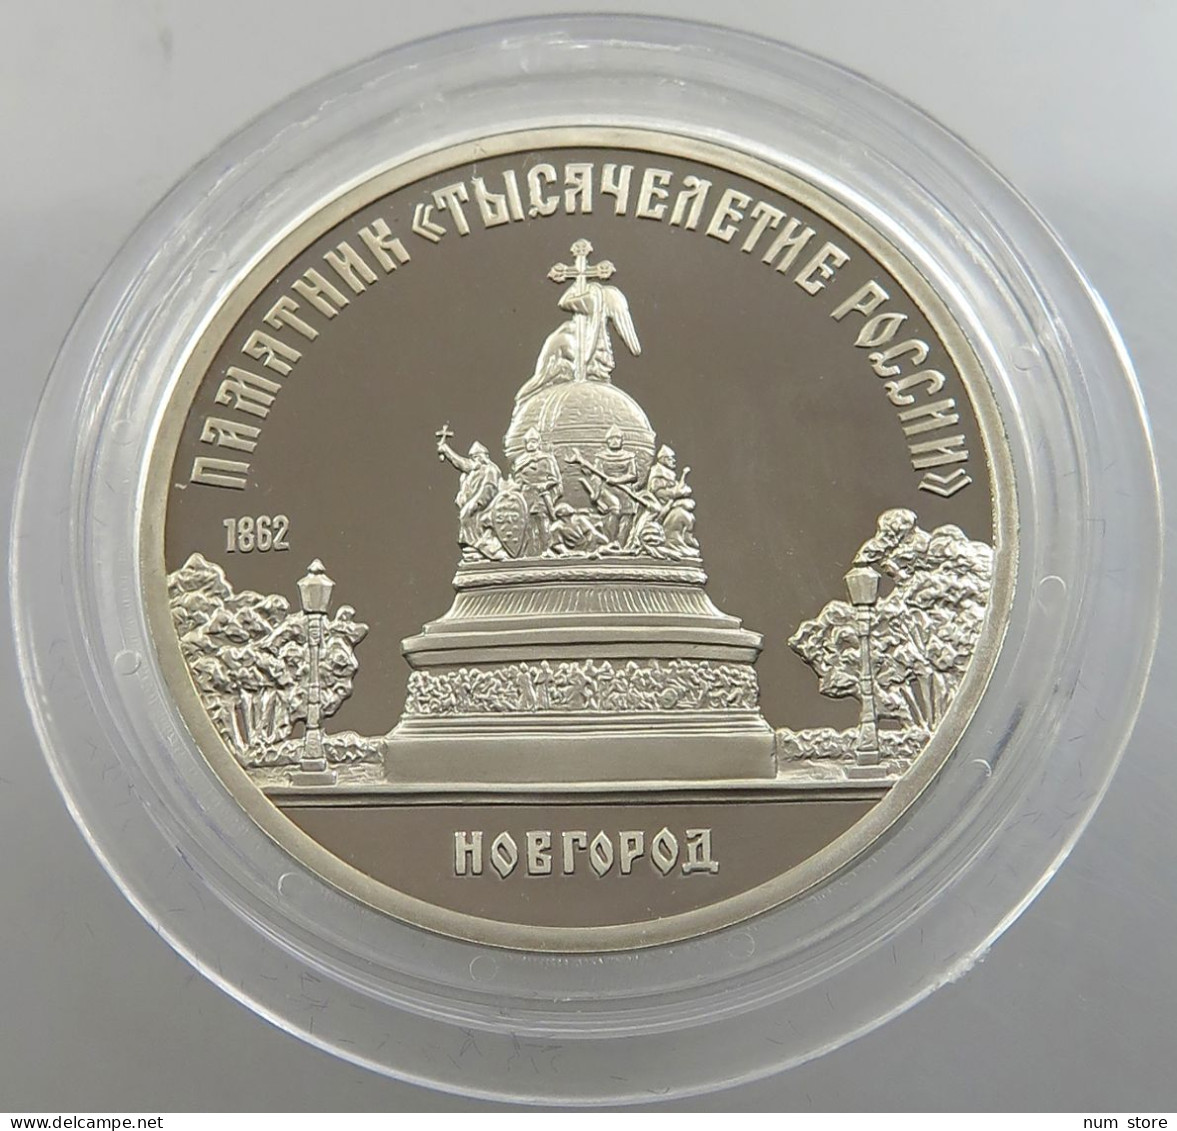 RUSSIA USSR 5 ROUBLES 1988 PROOF #sm14 0357 - Russland